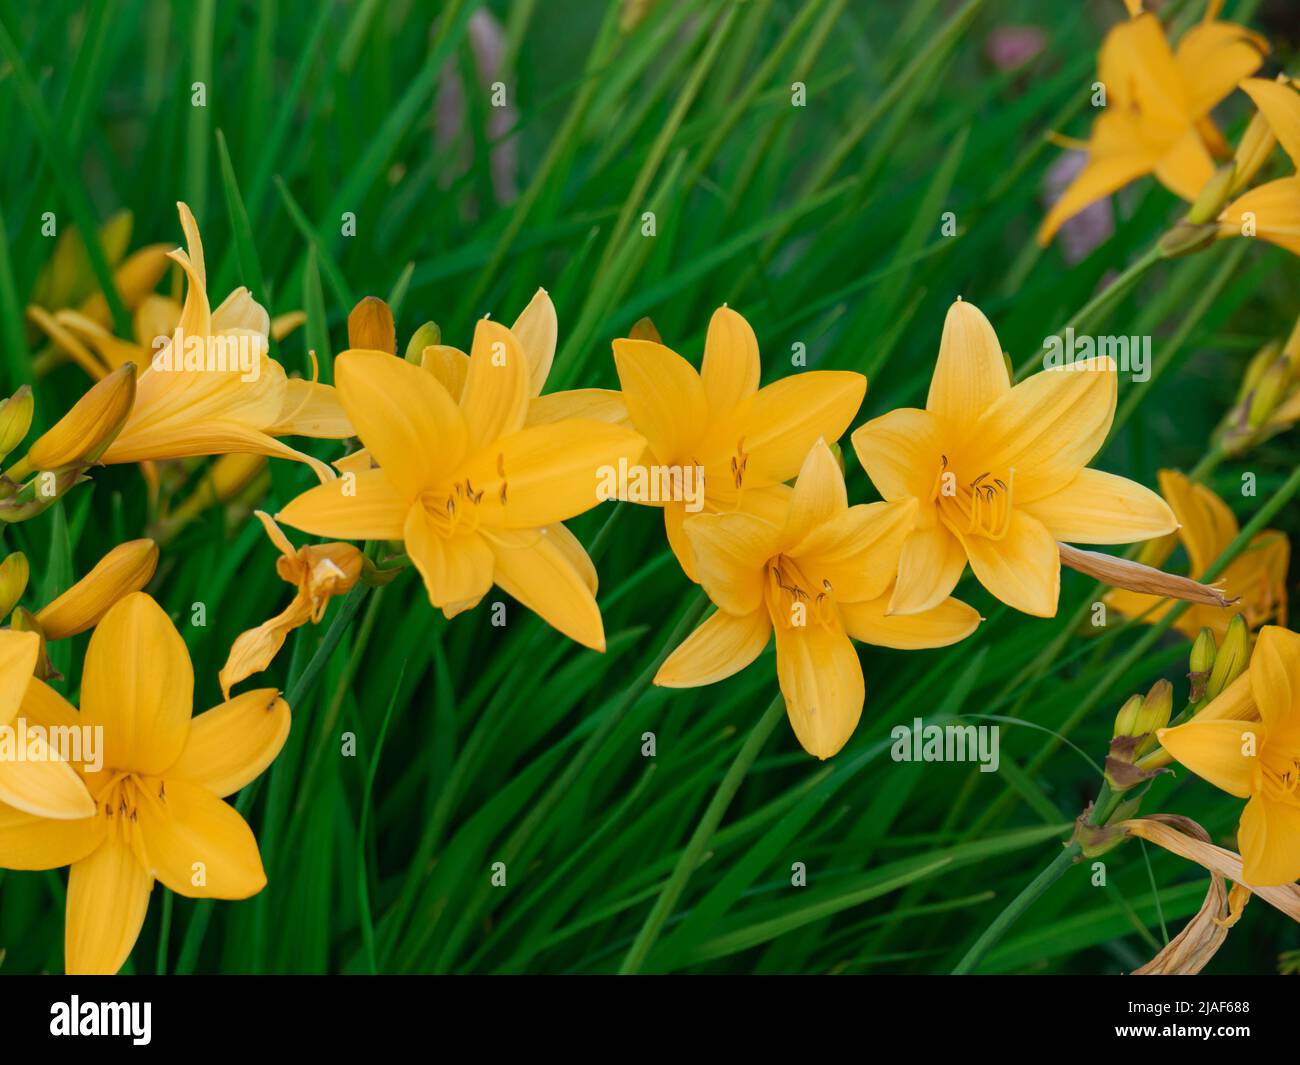 Summer in the garden on a sunny day. Orange flowers of a day lily against a background of greenery lit by sunlight. Stock Photo